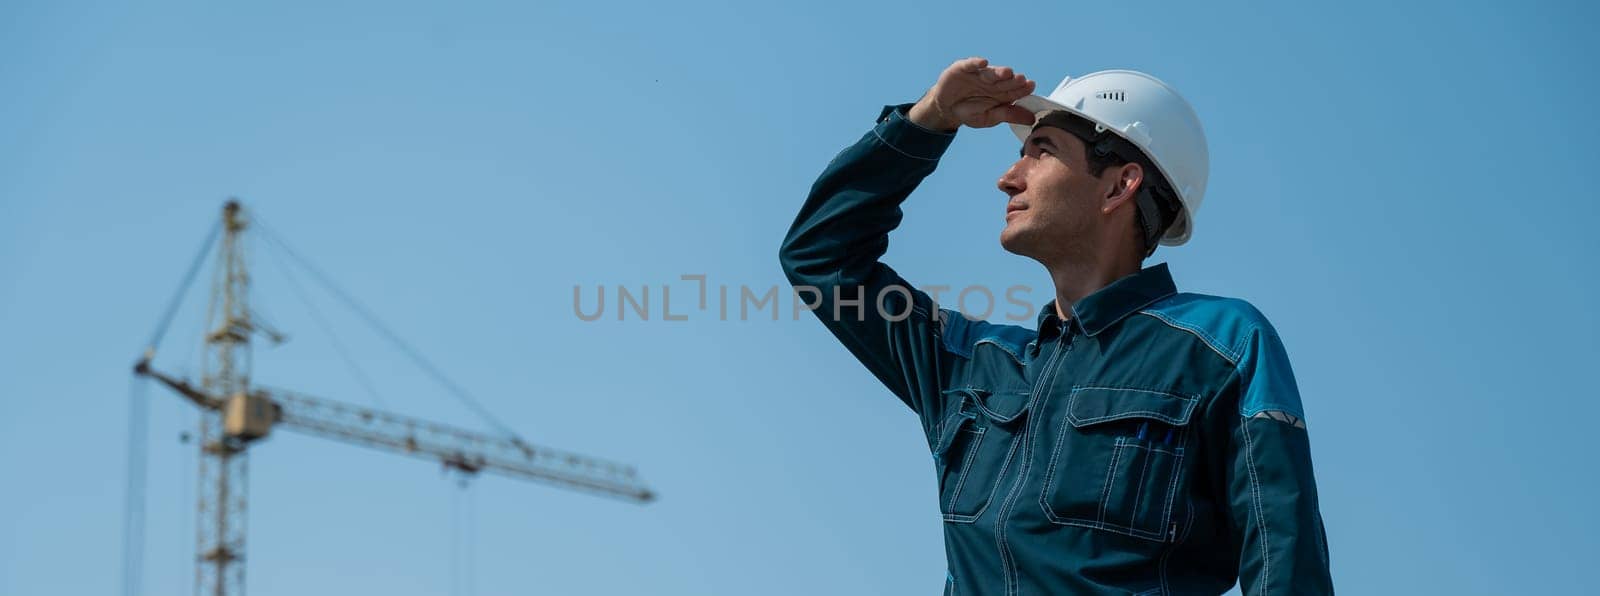 A builder in work clothes and a helmet stands on a construction site against the background of a construction crane. by mrwed54